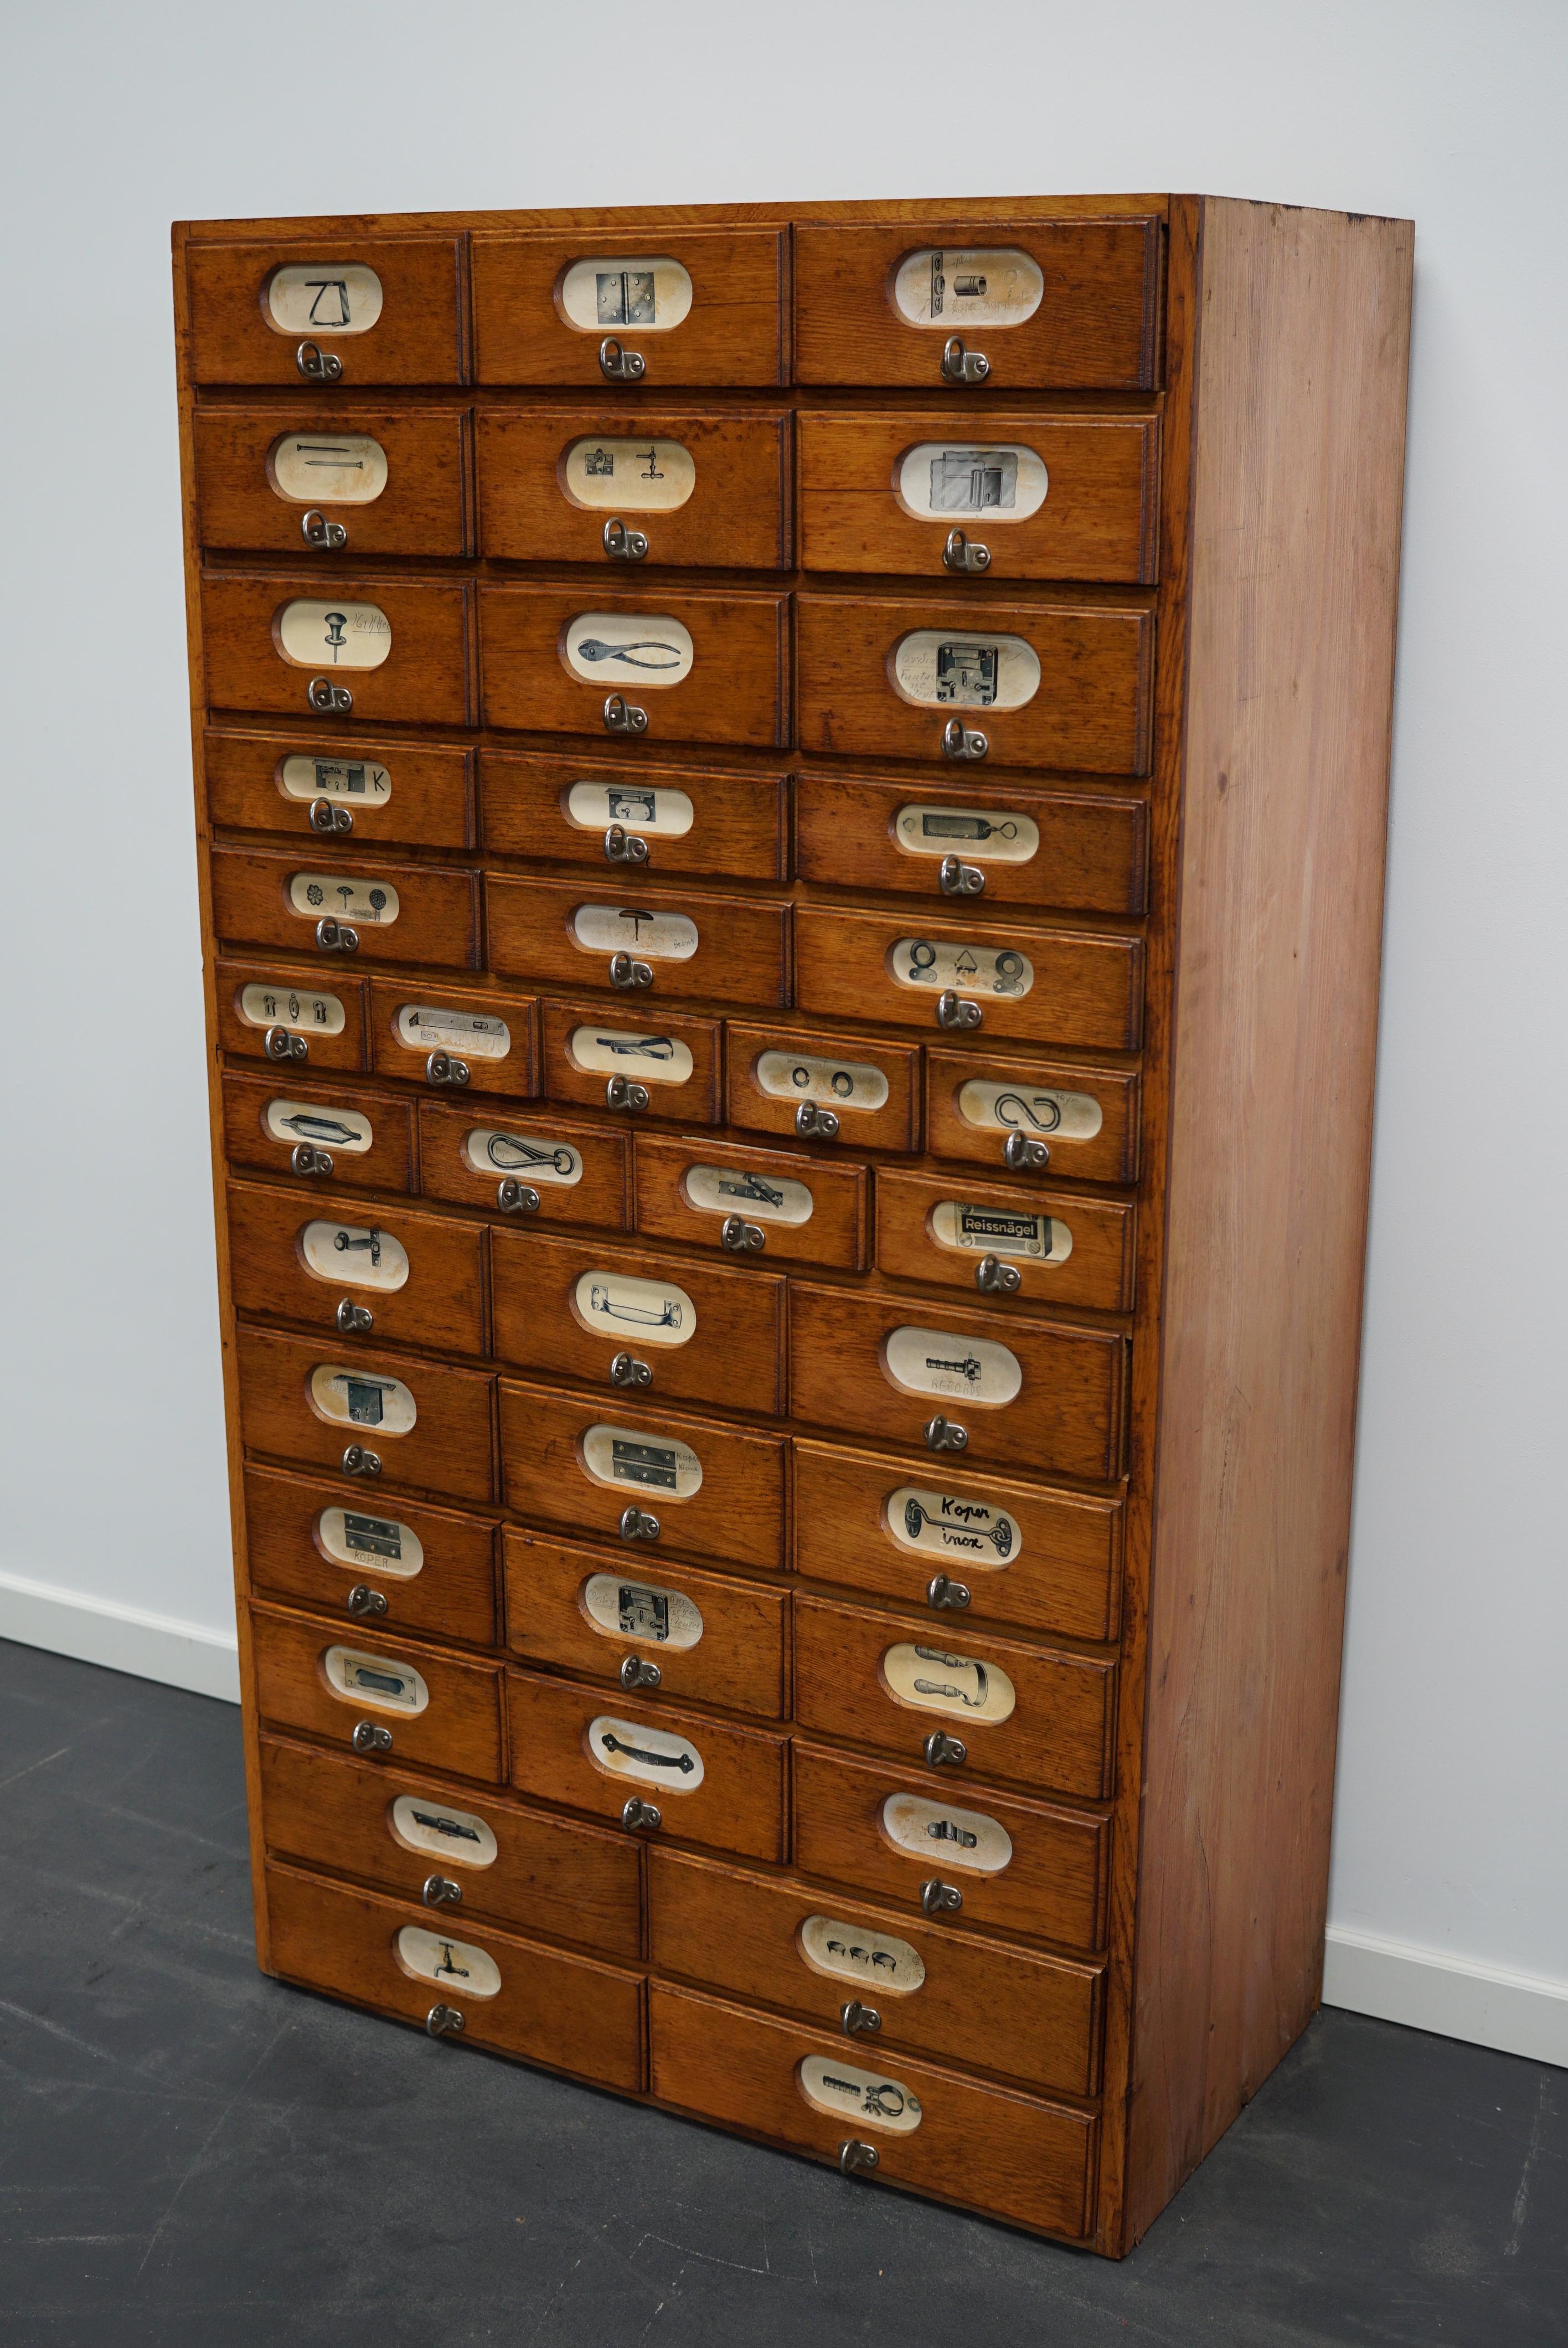 This apothecary cabinet was made circa 1940s in Germany and was later used in a hardware store in Belgium until recently. It features many drawers in different sizes with metal handles and the labels of the contents.